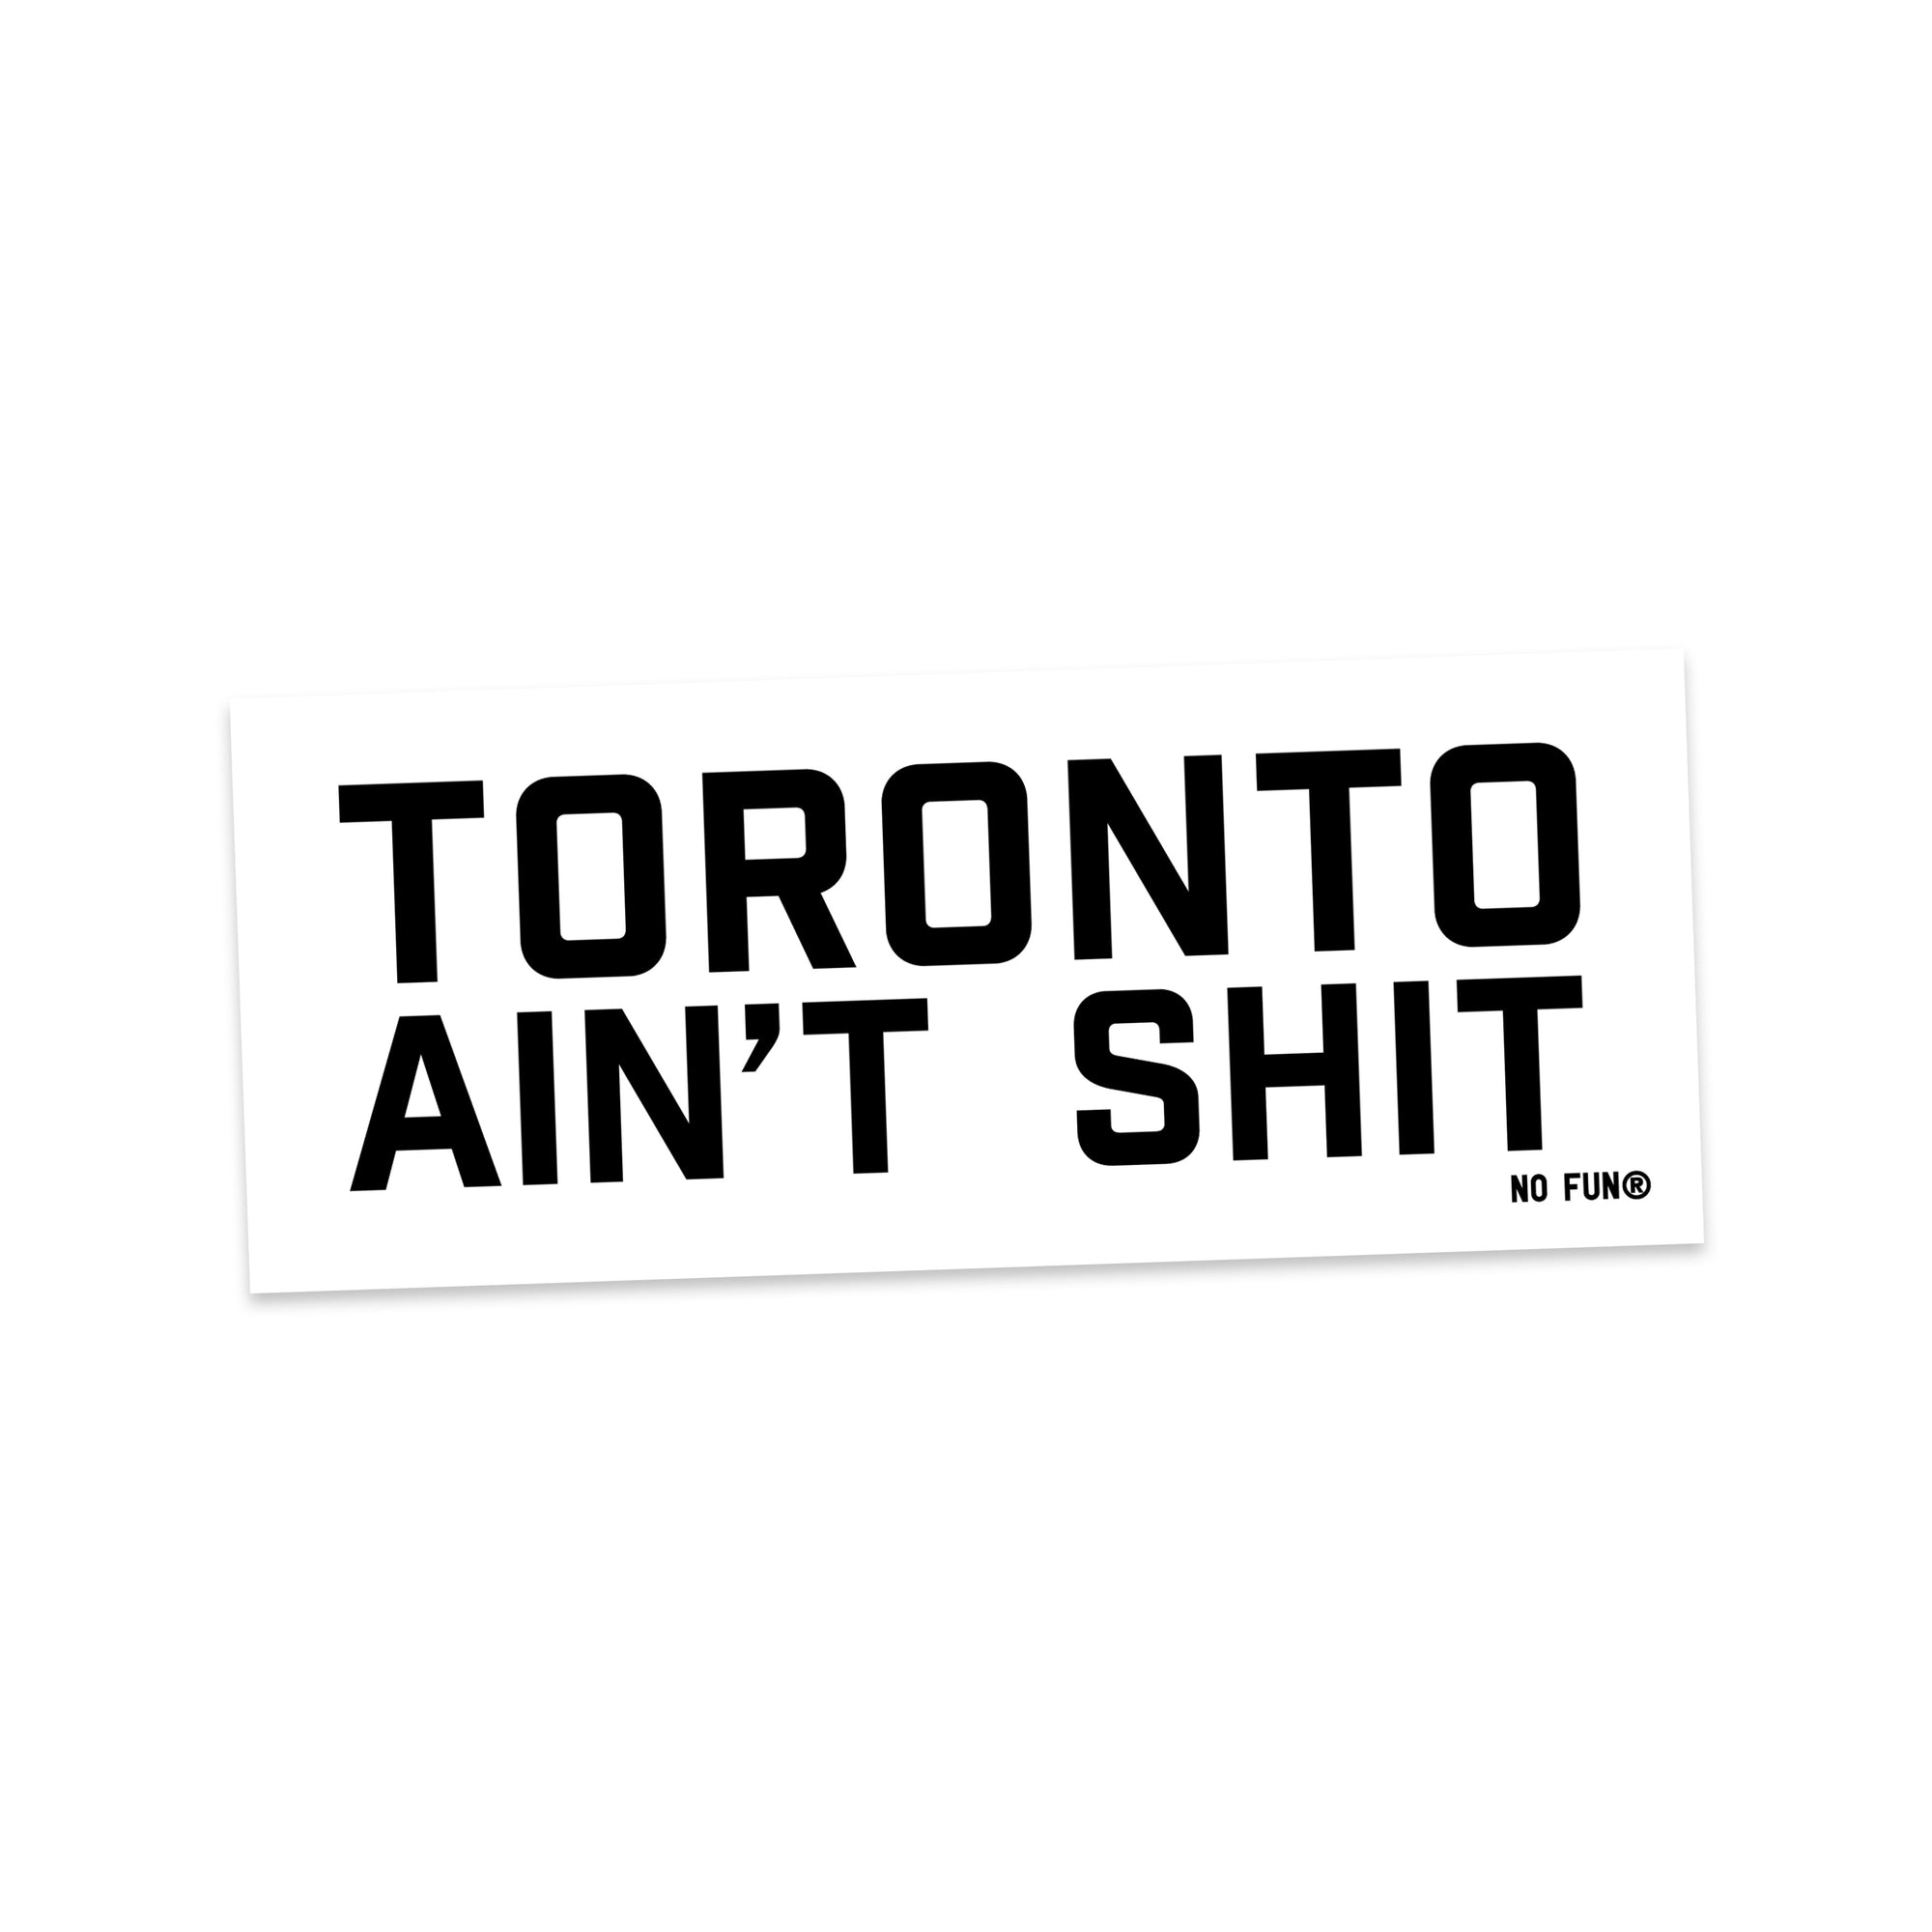 The "Souvenir" Bumper sticker by No Fun®. Sticker is white, with the phrase "Toronto Ain't Shit" printed in blue ink. There is a small No Fun® logo in the bottom right hand corner of the product.